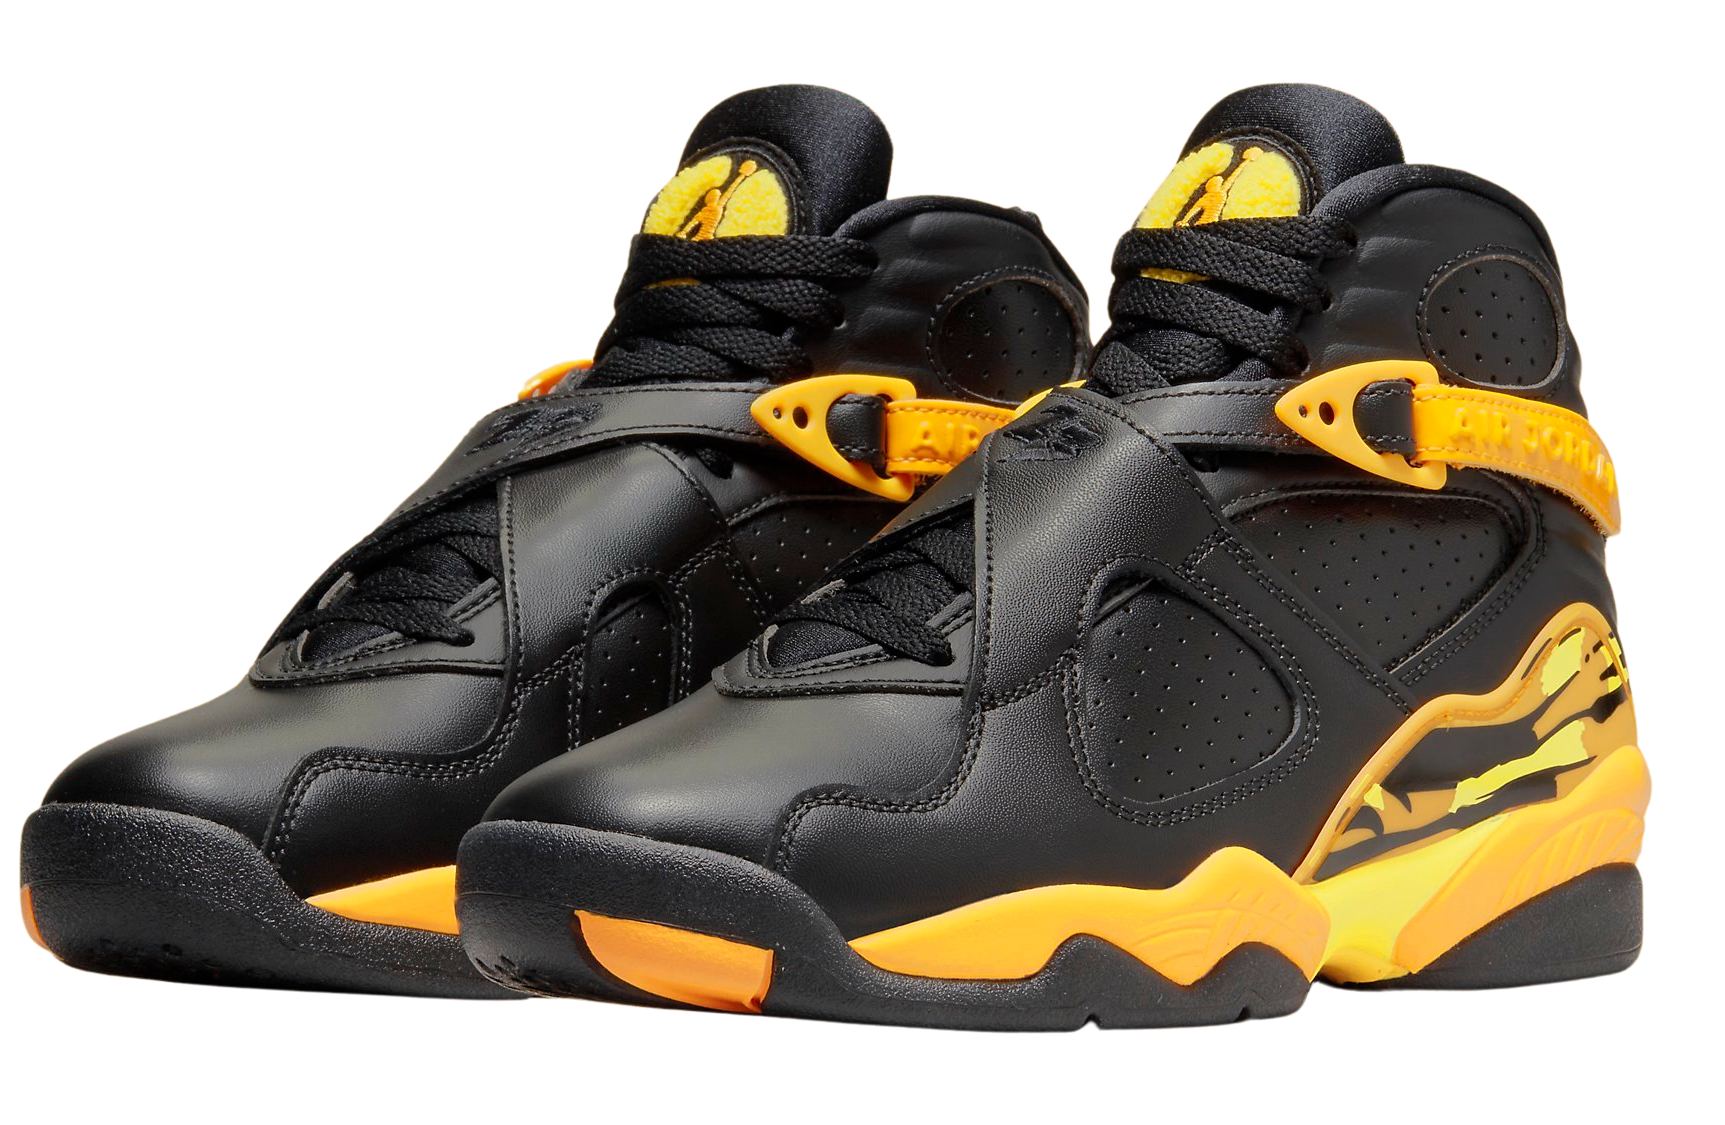 Air Jordan 8 Taxi Sneaker Match T-Shirts, Hoodies, and Outfits